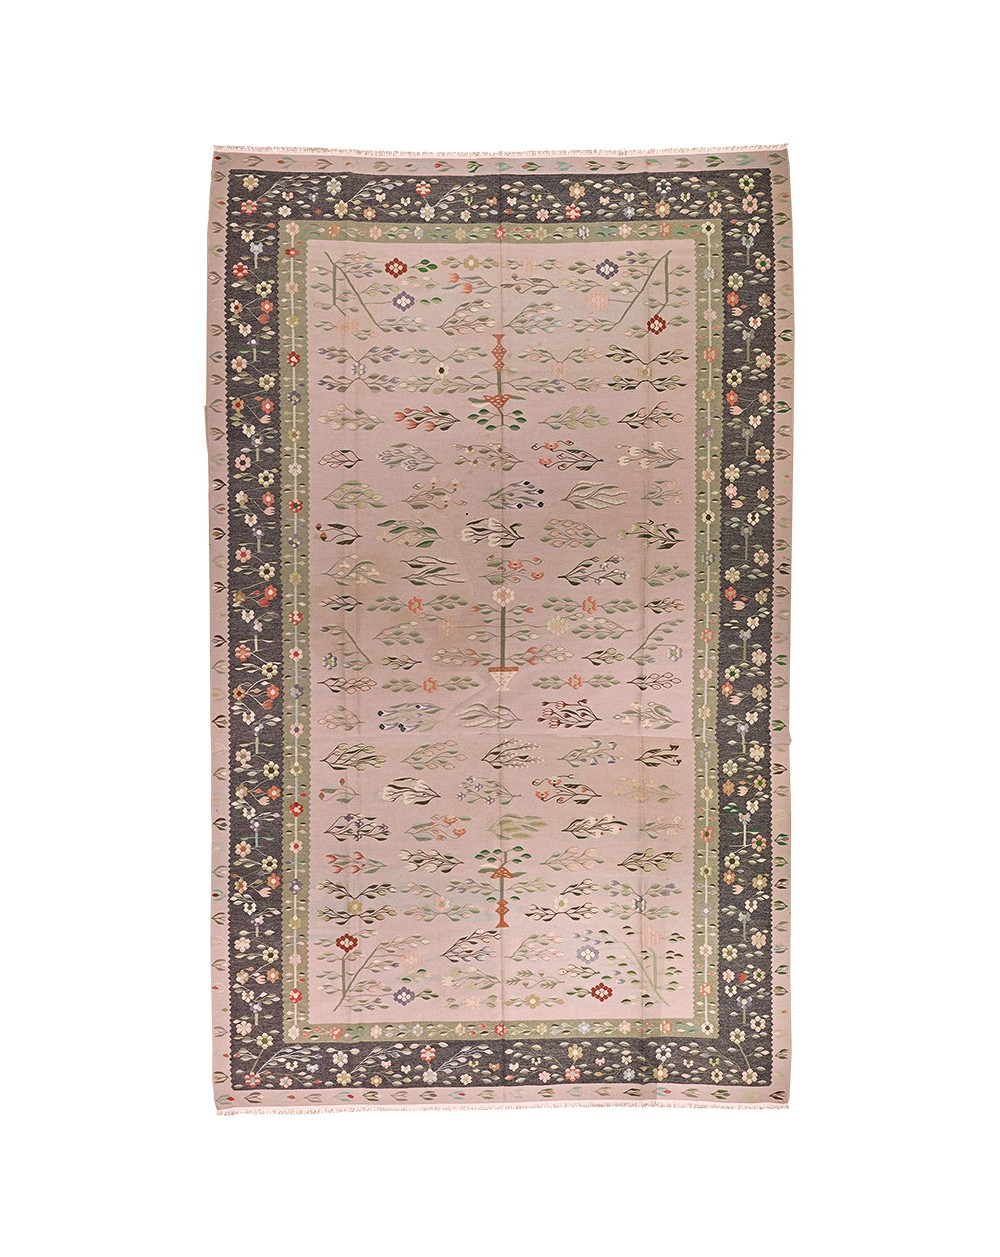 Kilim with floral pattern